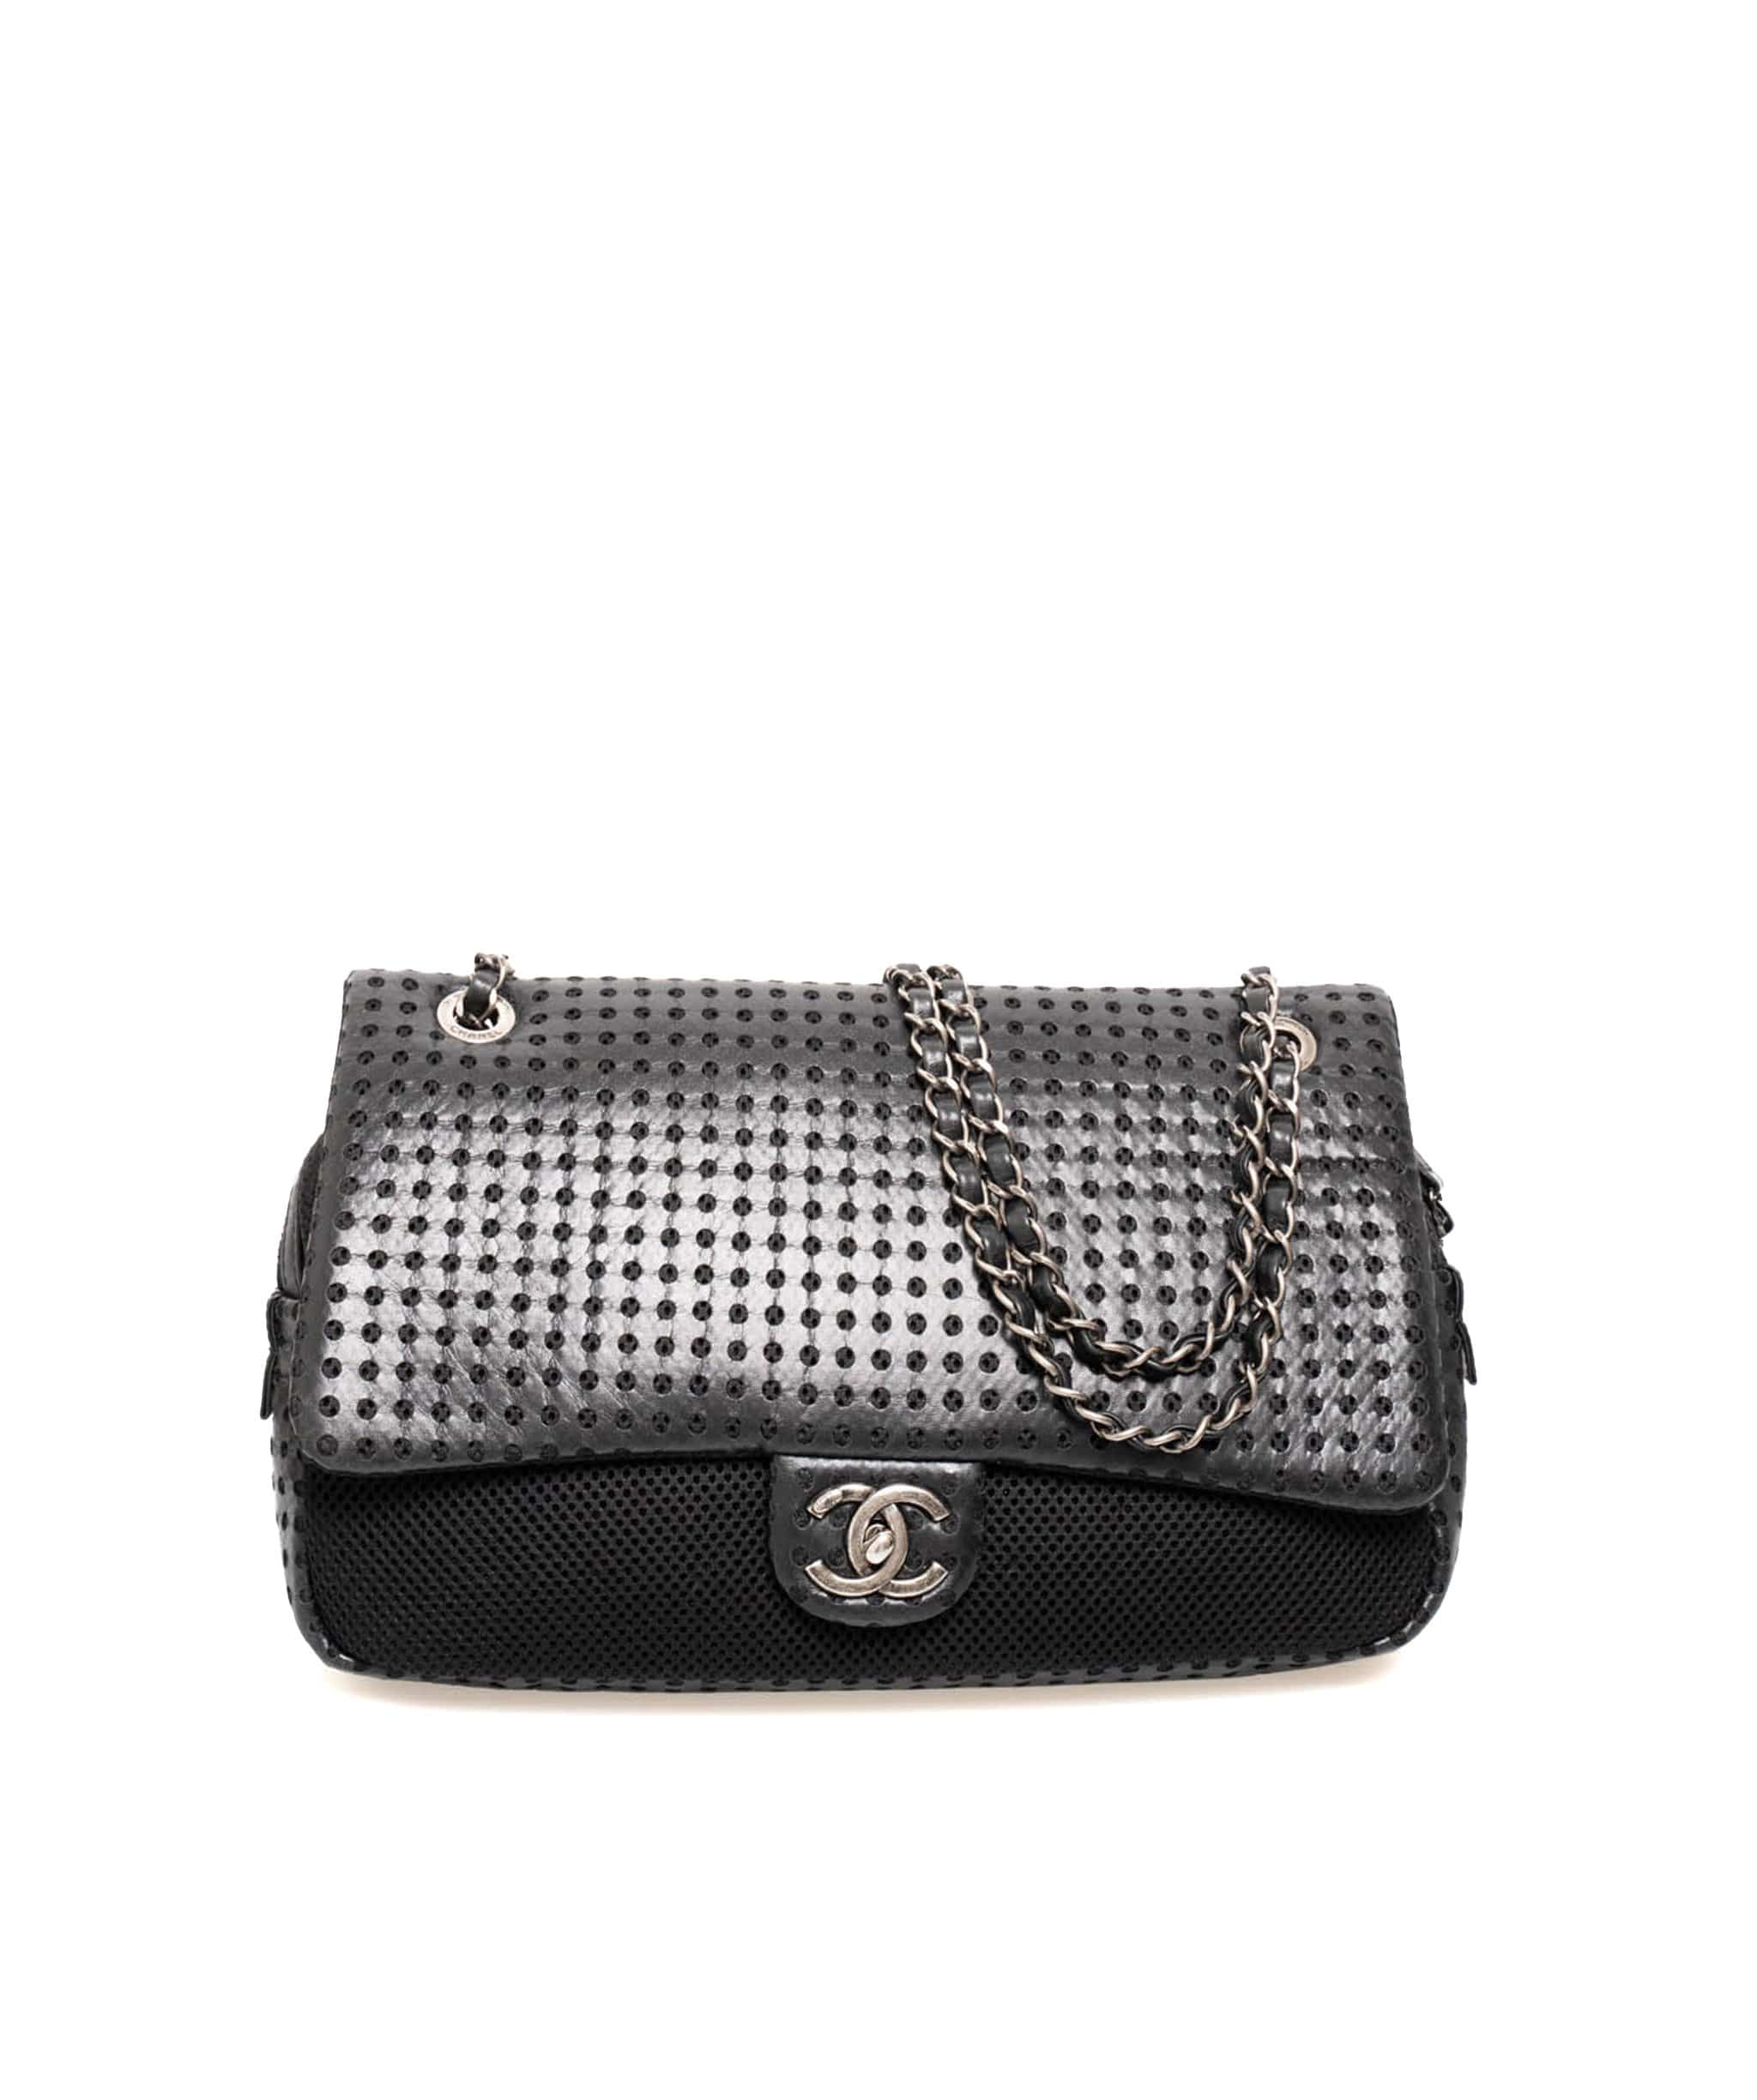 Chanel Chanel Perforated Flap Bag - ADL1549